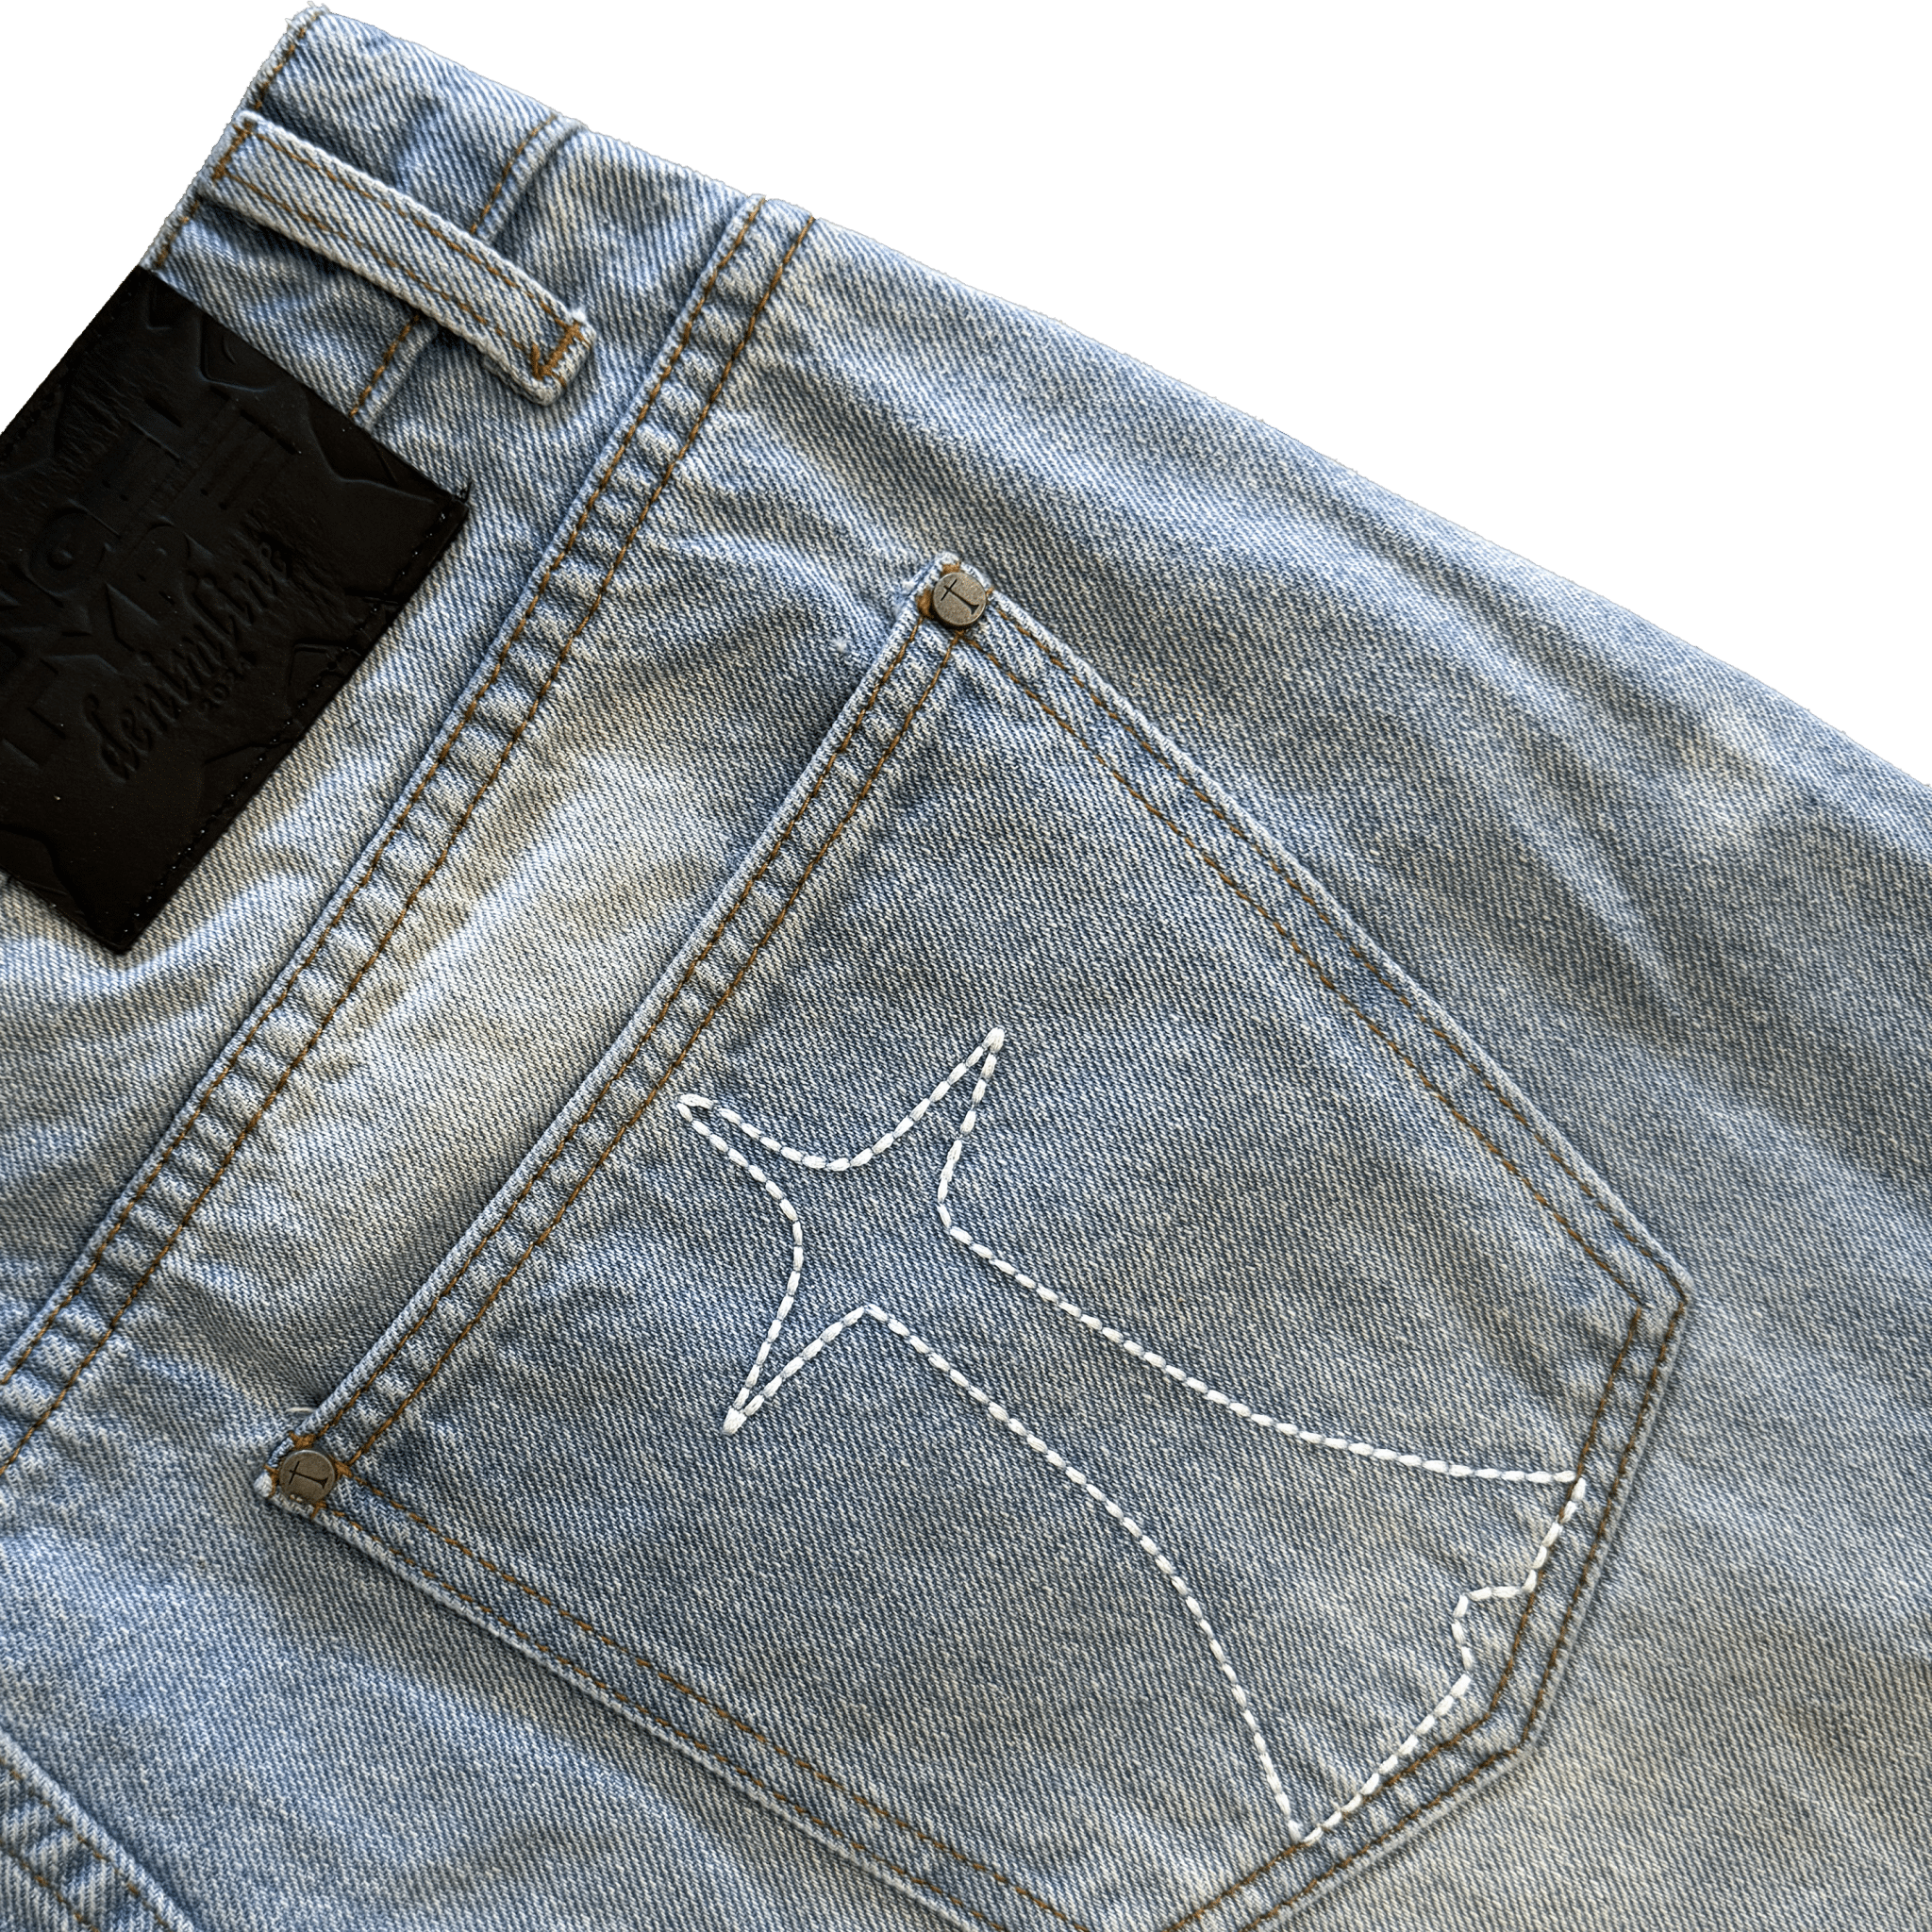 (A) STITCHED BAGGY DENIM - angeltype